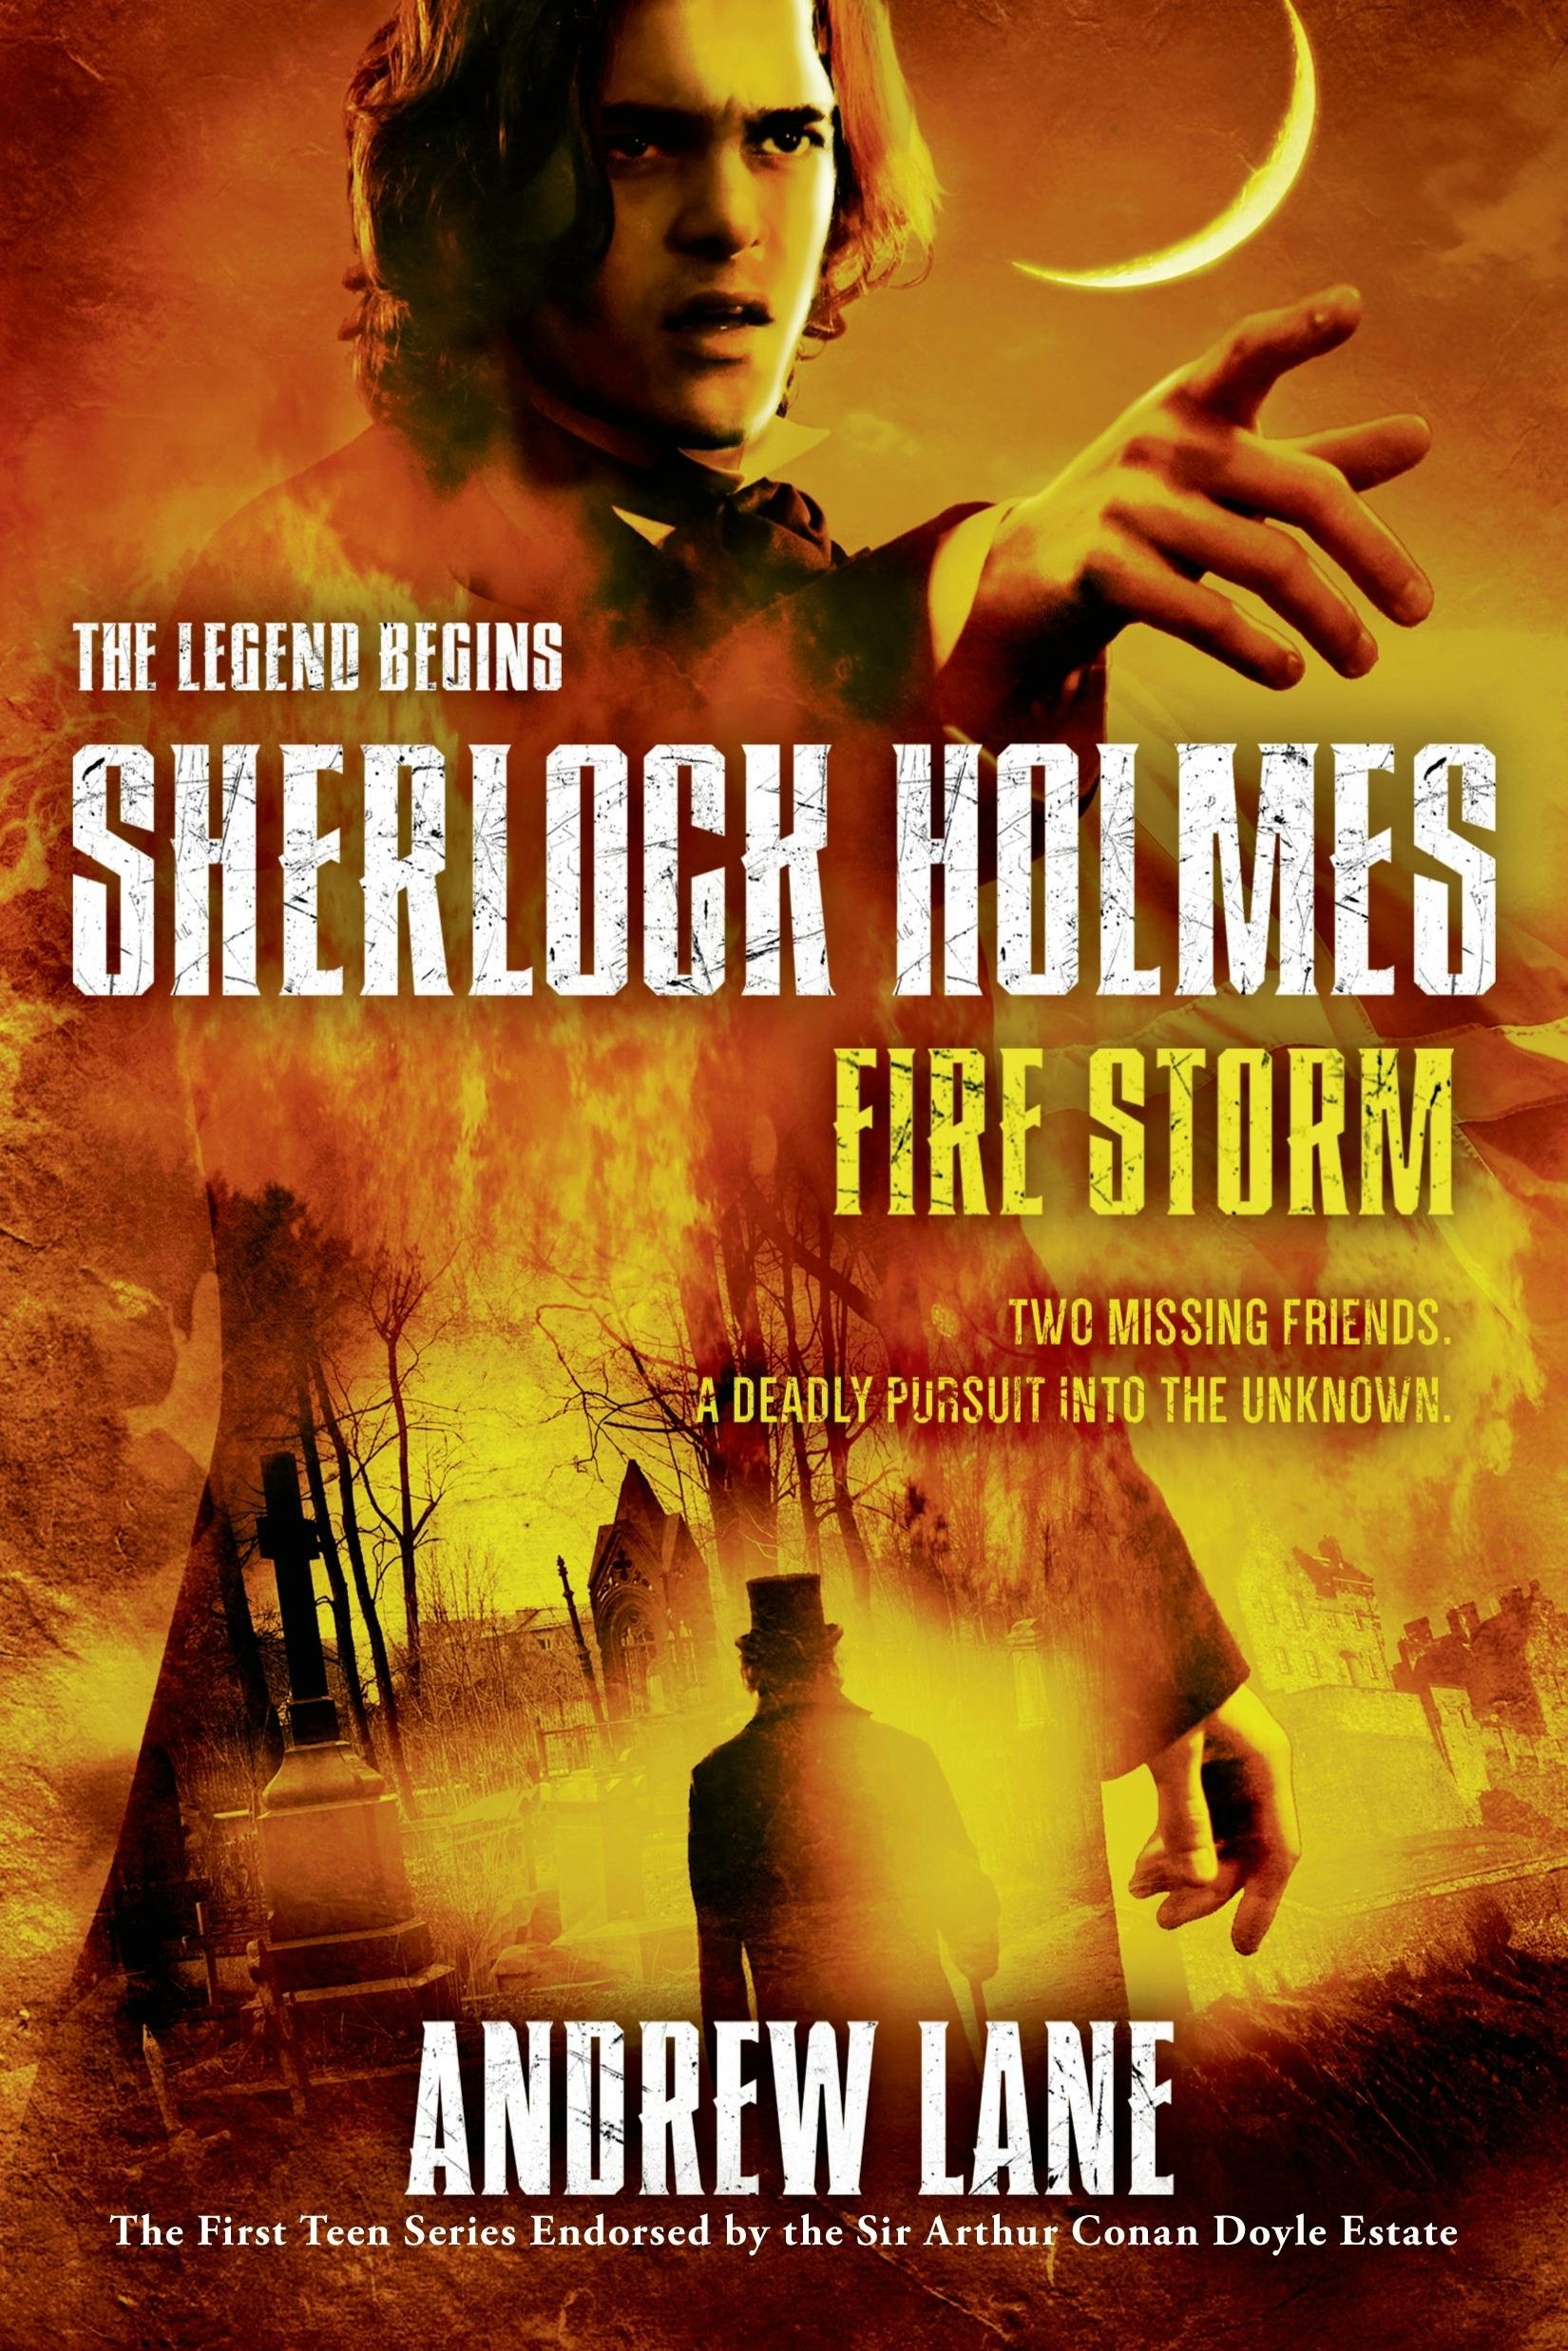 the adventures of sherlock holmes book for kids christian